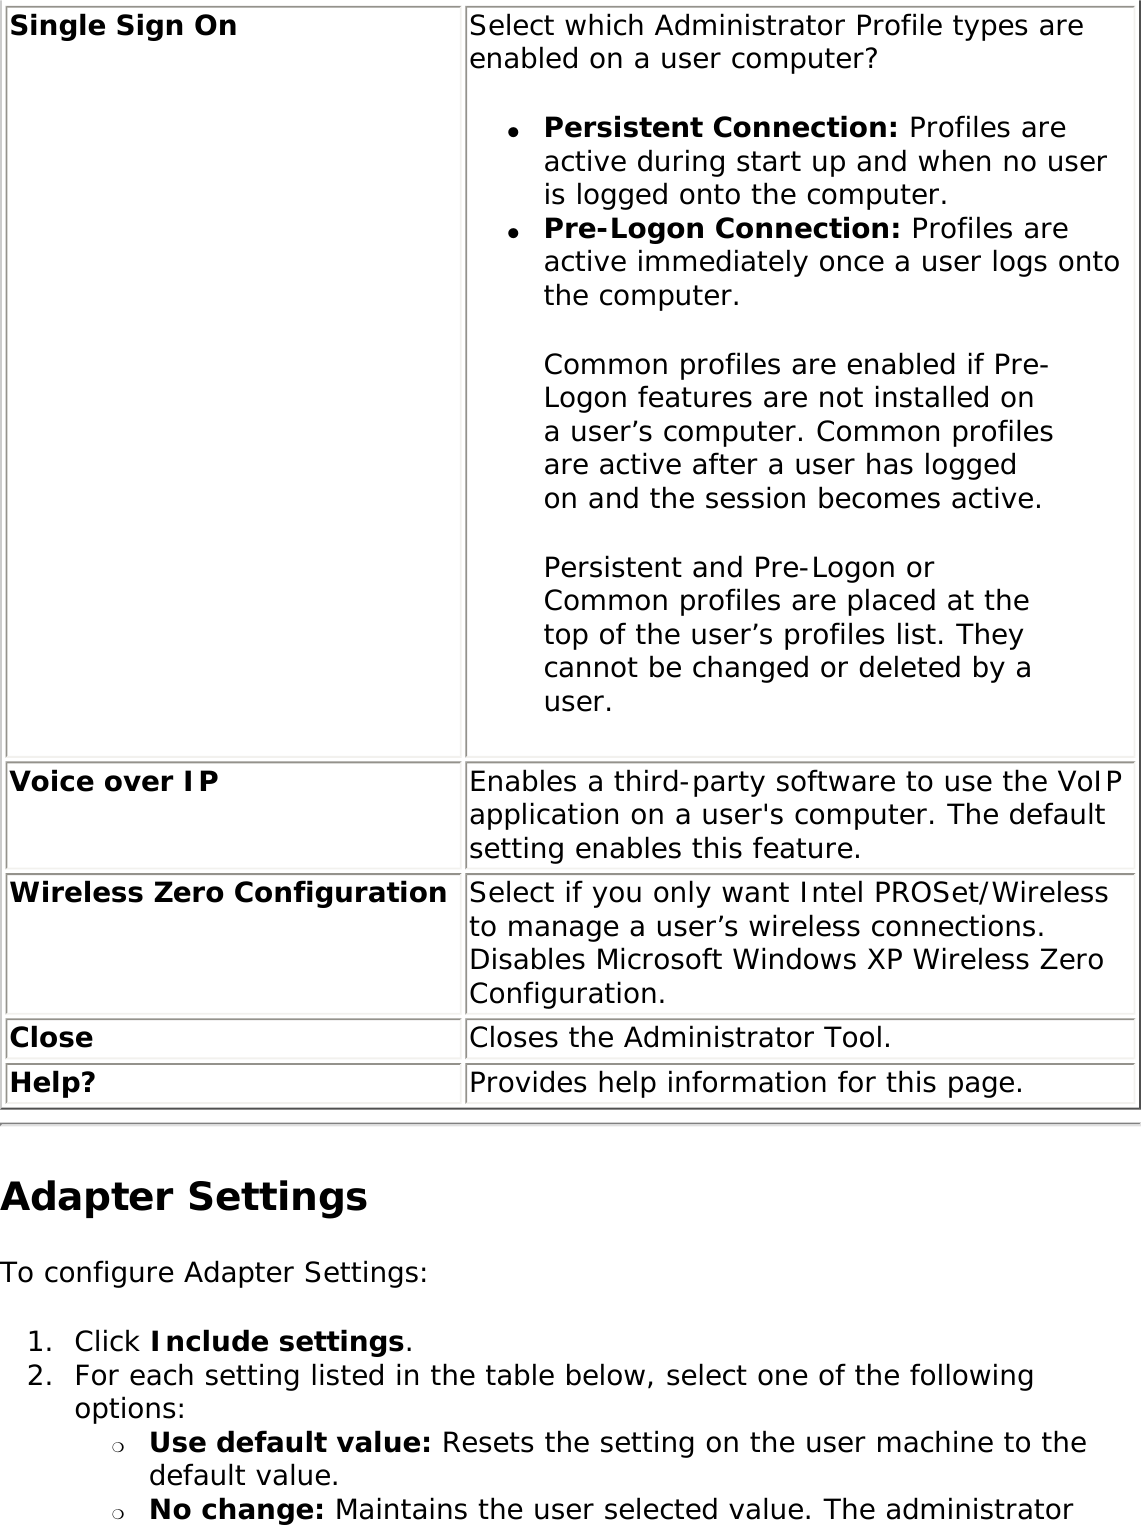 Single Sign On  Select which Administrator Profile types are enabled on a user computer? ●     Persistent Connection: Profiles are active during start up and when no user is logged onto the computer. ●     Pre-Logon Connection: Profiles are active immediately once a user logs onto the computer. Common profiles are enabled if Pre-Logon features are not installed on a user’s computer. Common profiles are active after a user has logged on and the session becomes active. Persistent and Pre-Logon or Common profiles are placed at the top of the user’s profiles list. They cannot be changed or deleted by a user. Voice over IP Enables a third-party software to use the VoIP application on a user&apos;s computer. The default setting enables this feature. Wireless Zero Configuration  Select if you only want Intel PROSet/Wireless to manage a user’s wireless connections. Disables Microsoft Windows XP Wireless Zero Configuration. Close  Closes the Administrator Tool. Help? Provides help information for this page.Adapter Settings To configure Adapter Settings: 1.  Click Include settings.2.  For each setting listed in the table below, select one of the following options: ❍     Use default value: Resets the setting on the user machine to the default value. ❍     No change: Maintains the user selected value. The administrator 